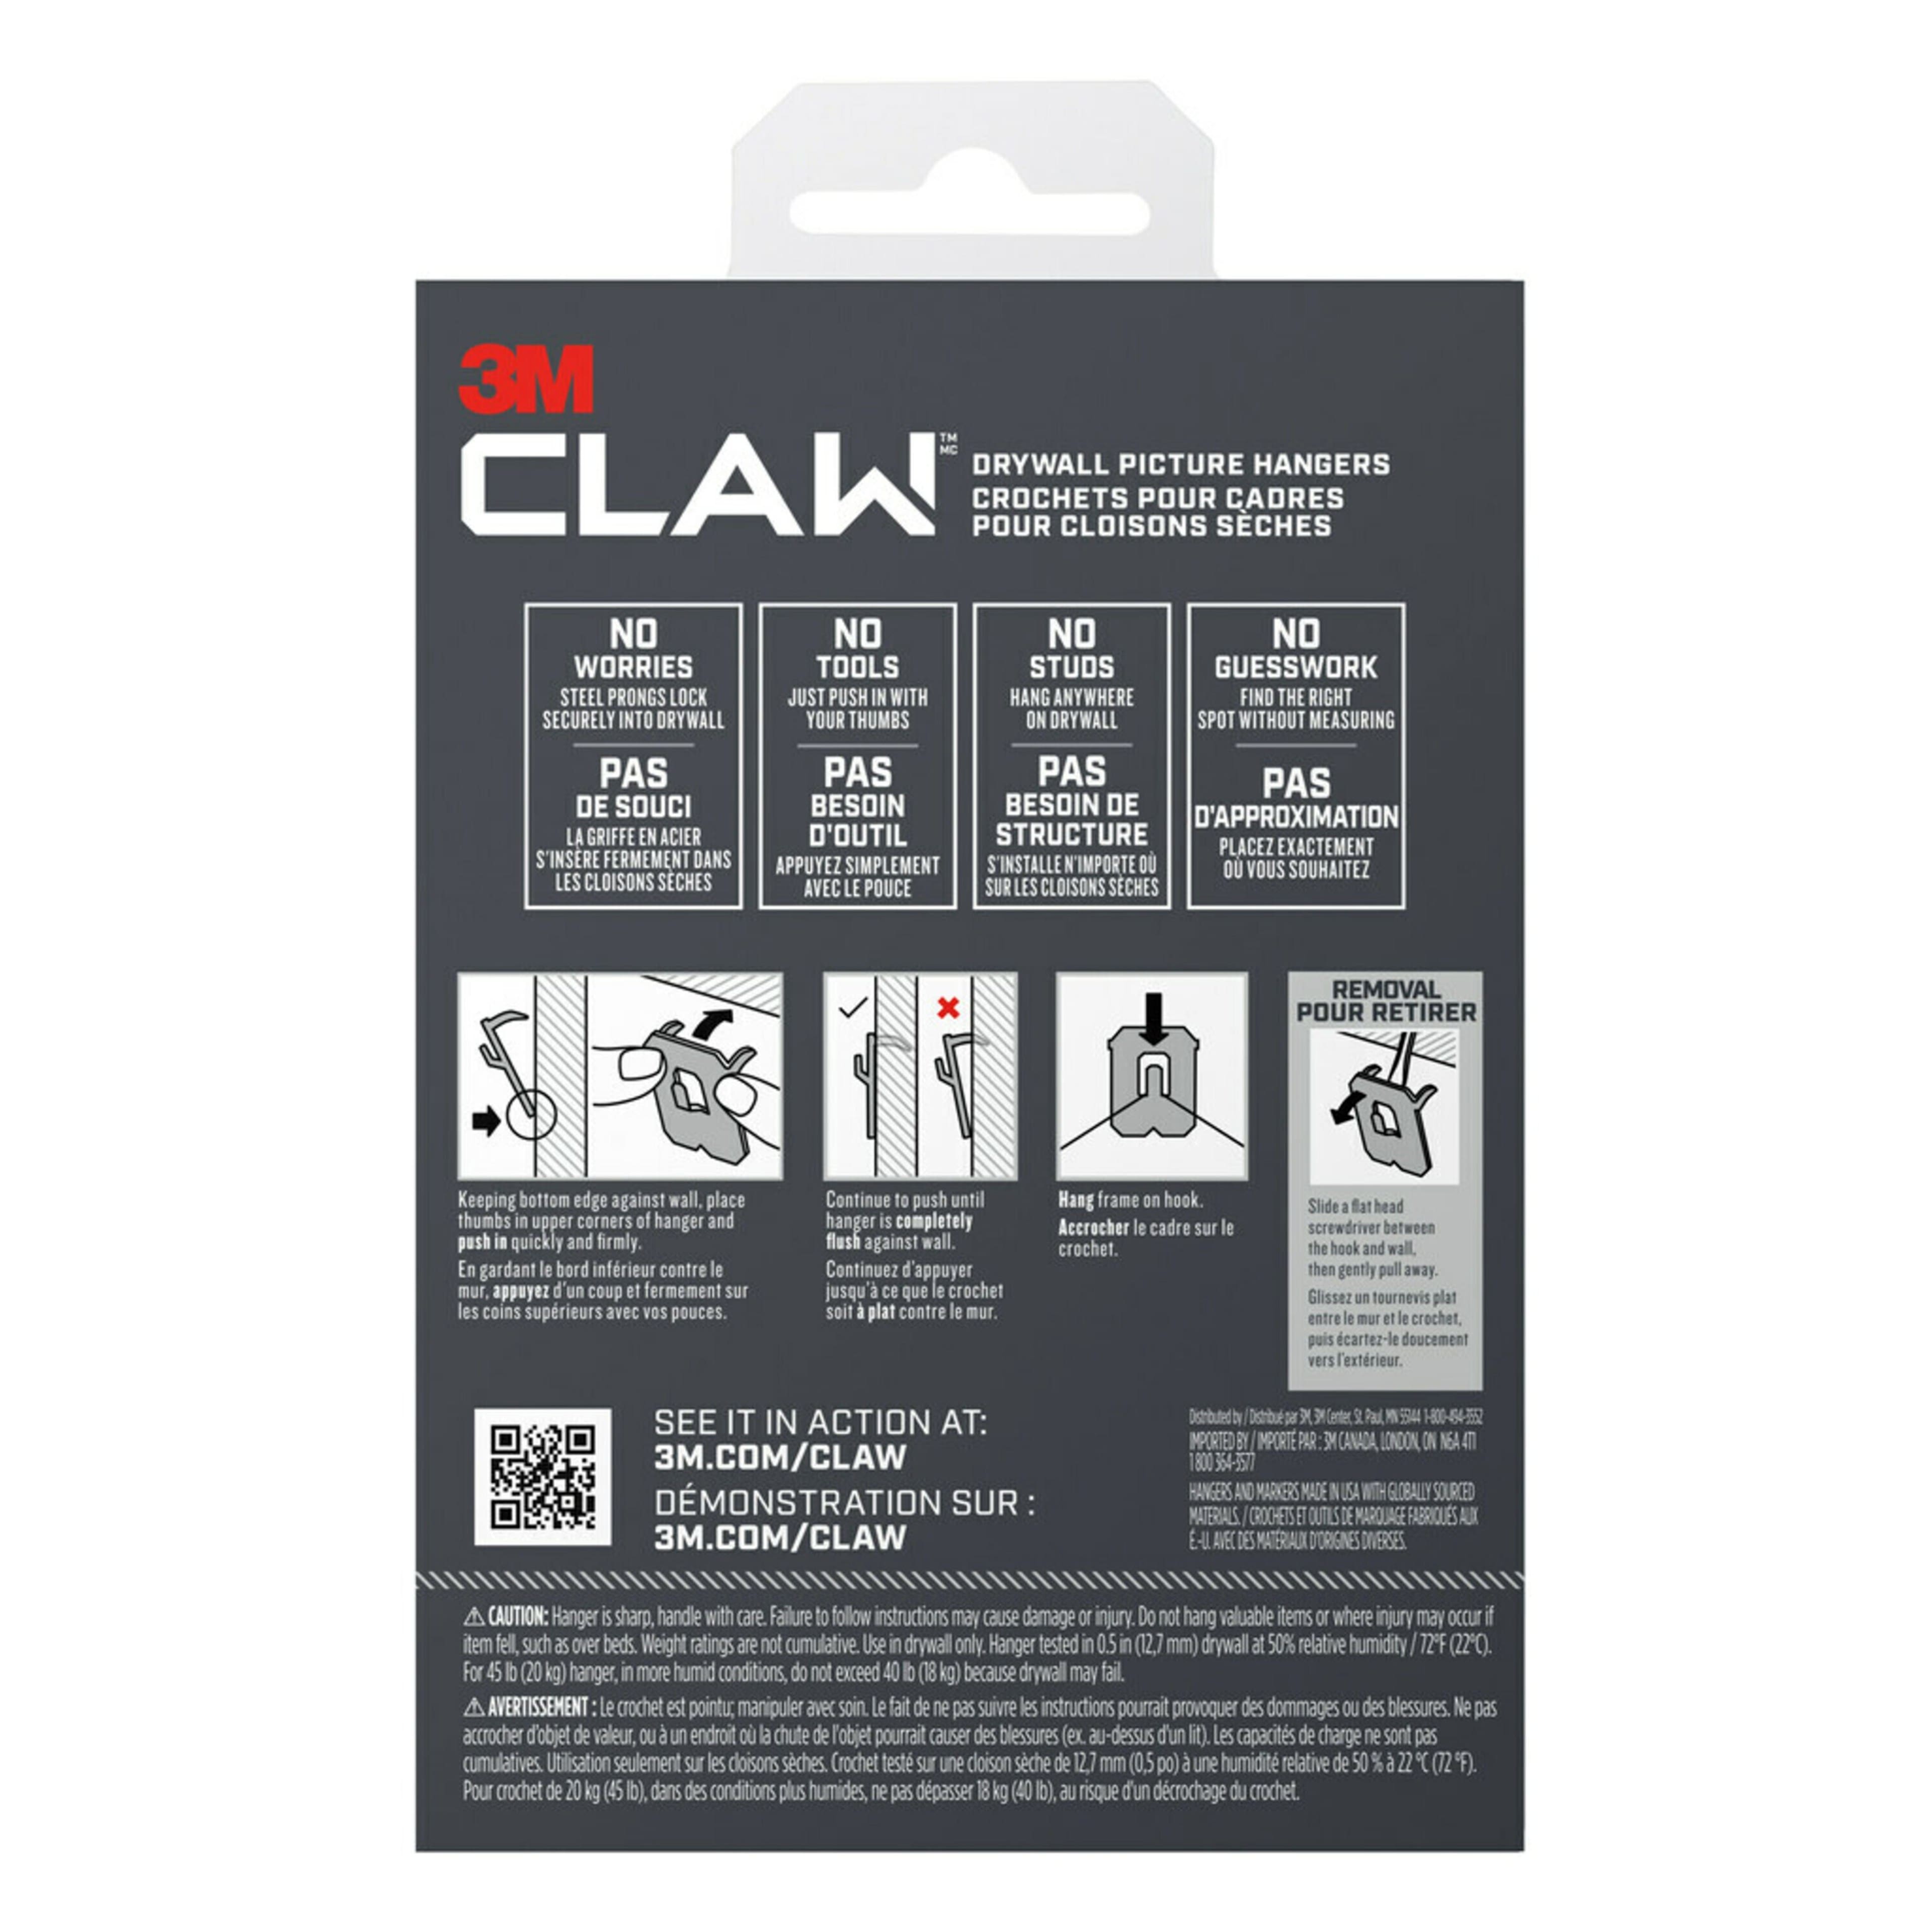 3M 45-Pound Claw Drywall Picture Hanger